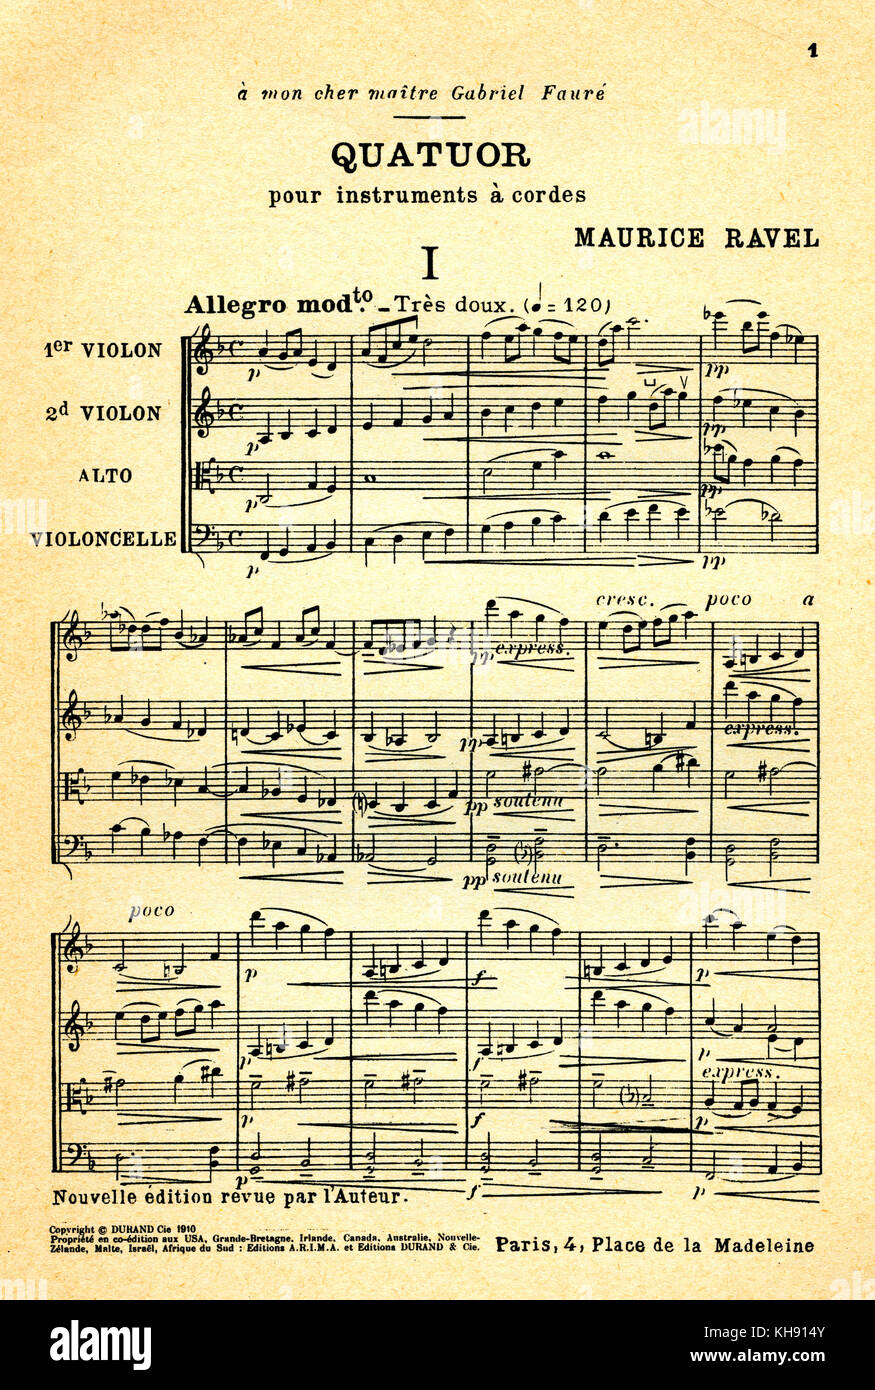 'Quatuor pour instruments à cordes ' - score by Maurice Ravel. Music for strings. Dedicated to Gariel Fauré,  French composer, 12th May 1845 - 4th November 1924. MR: French composer, 17 March 1875 - 28 December 1937. Published by Editions Durand, Paris. Stock Photo